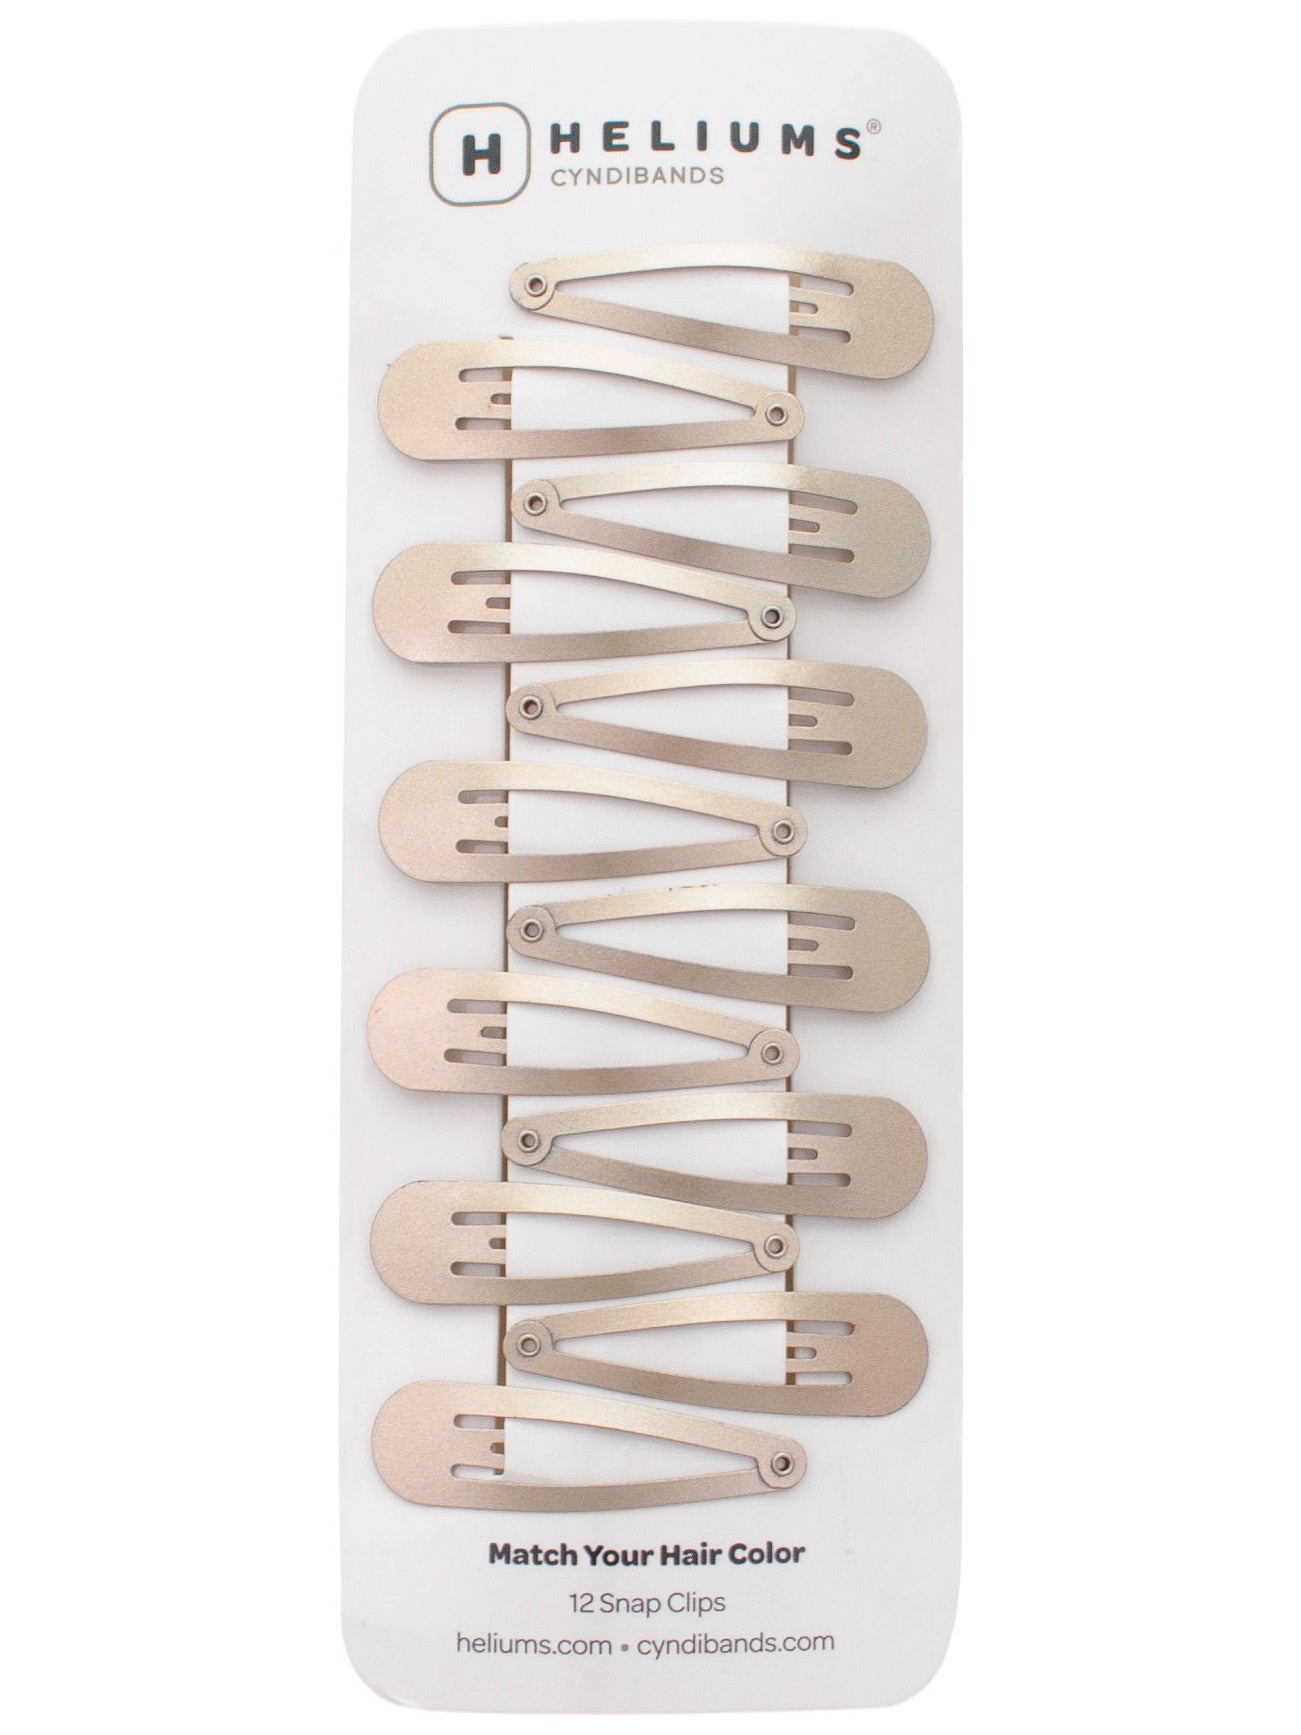 2 Inch Snap Clips Metal Barrettes - 12 Count